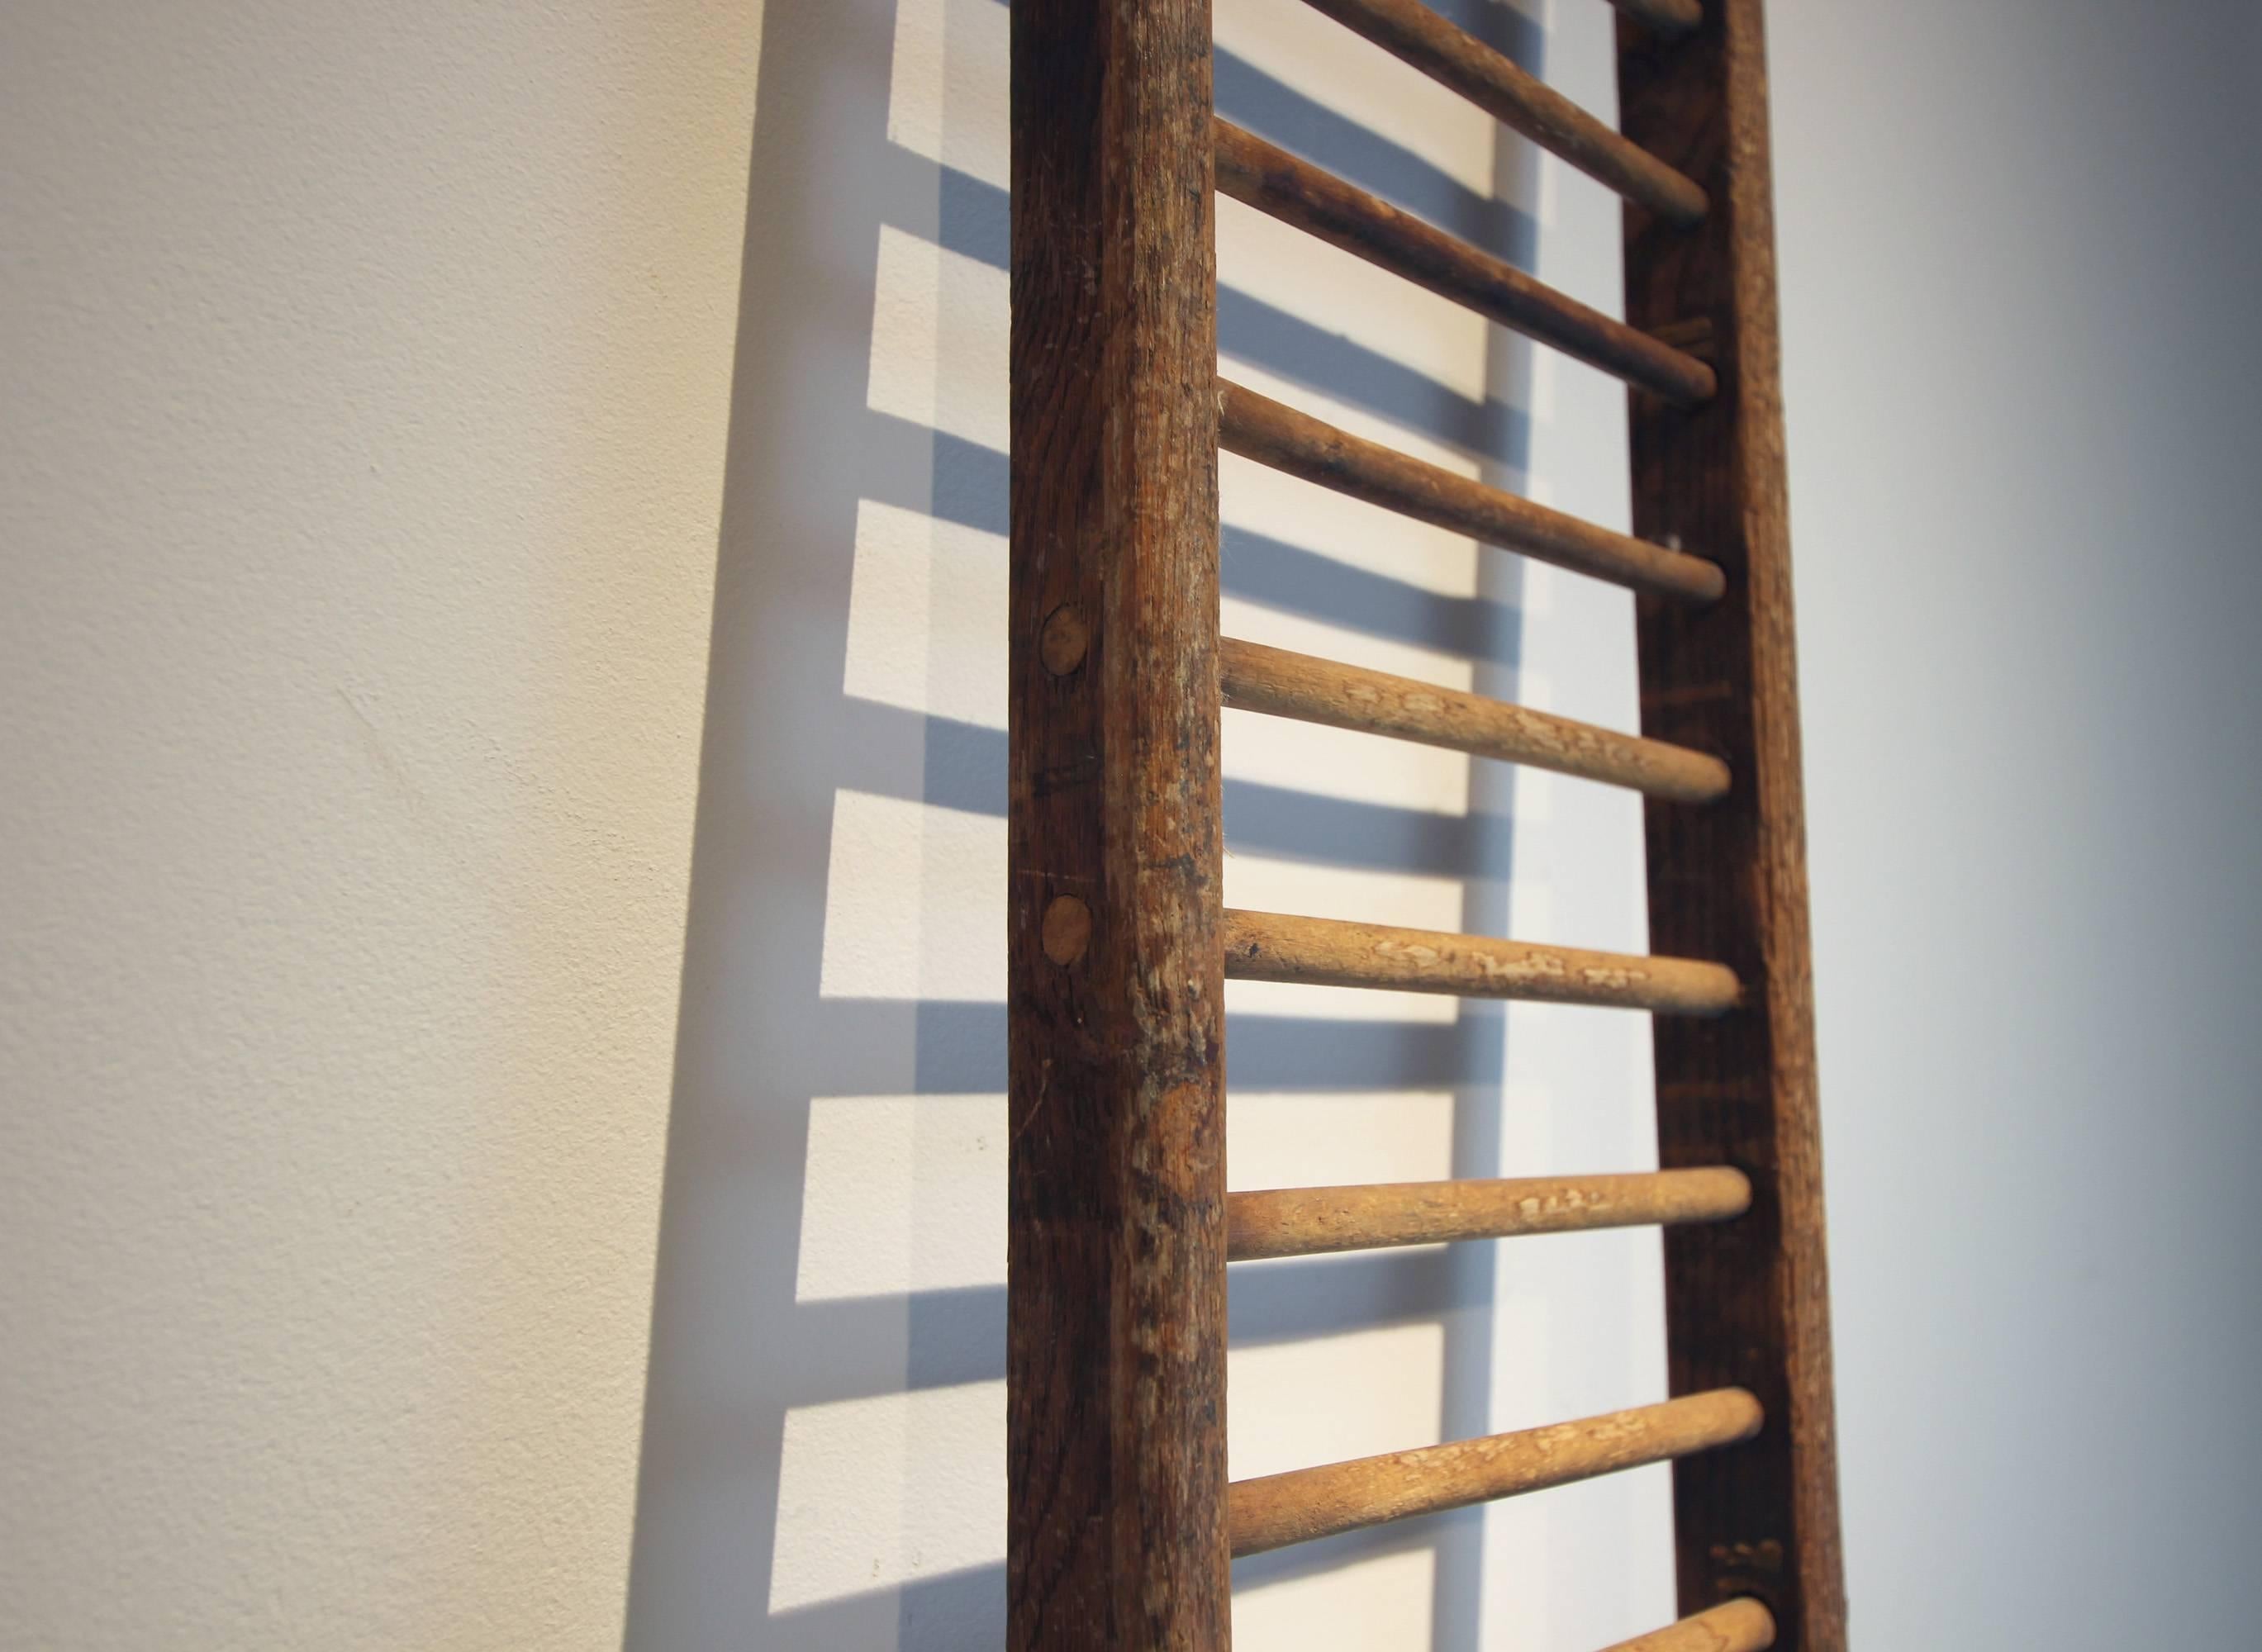 Good looking, small ladder, with architectural lines, originally used for drying herbs. Very good dusty, dry patina. American, early 20th century.